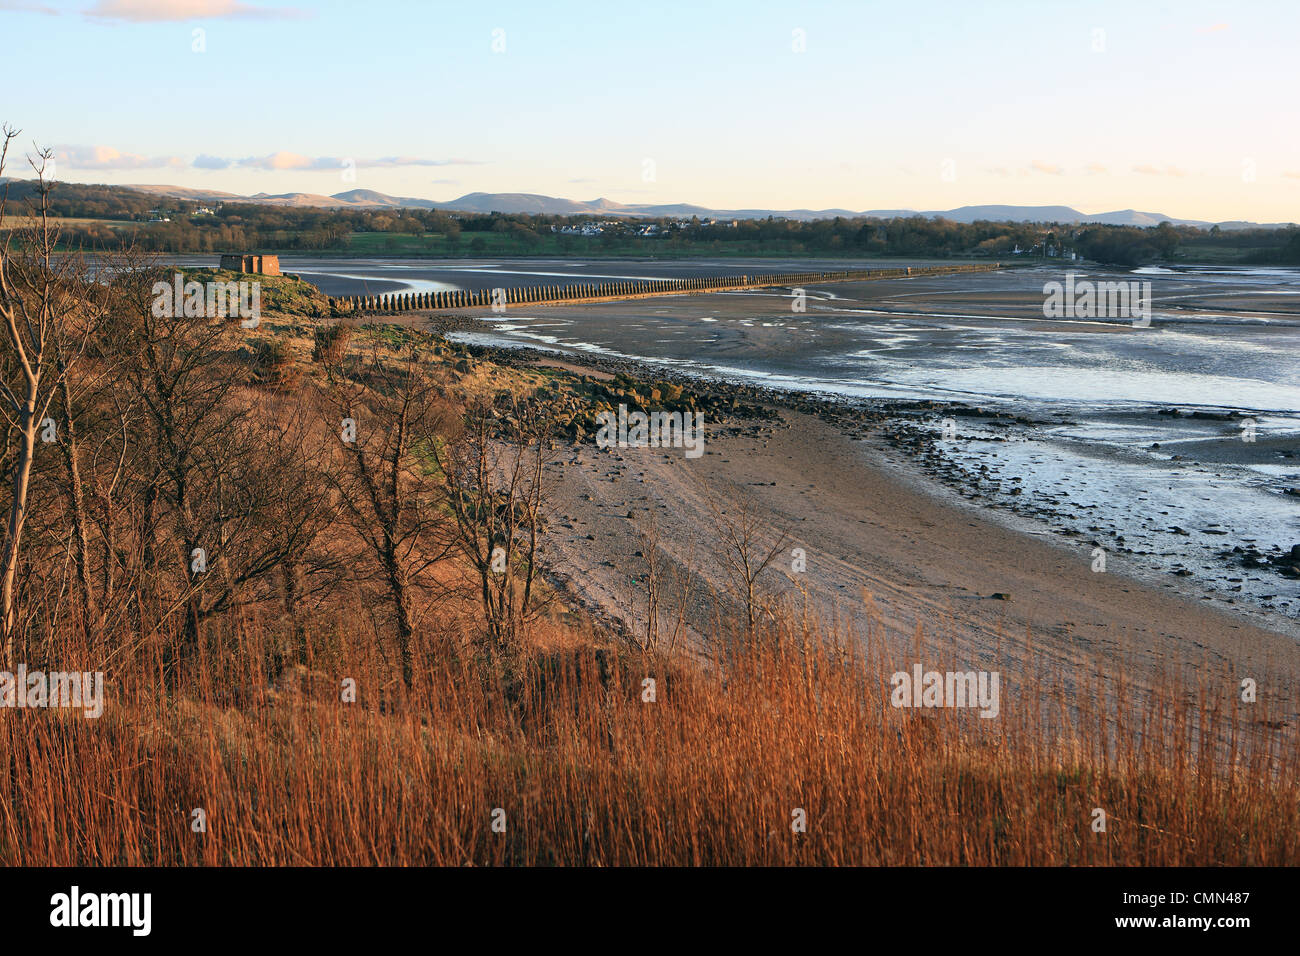 Beach on Cramond Island and defense fortifications along the causeway to Cramond at low tide Stock Photo